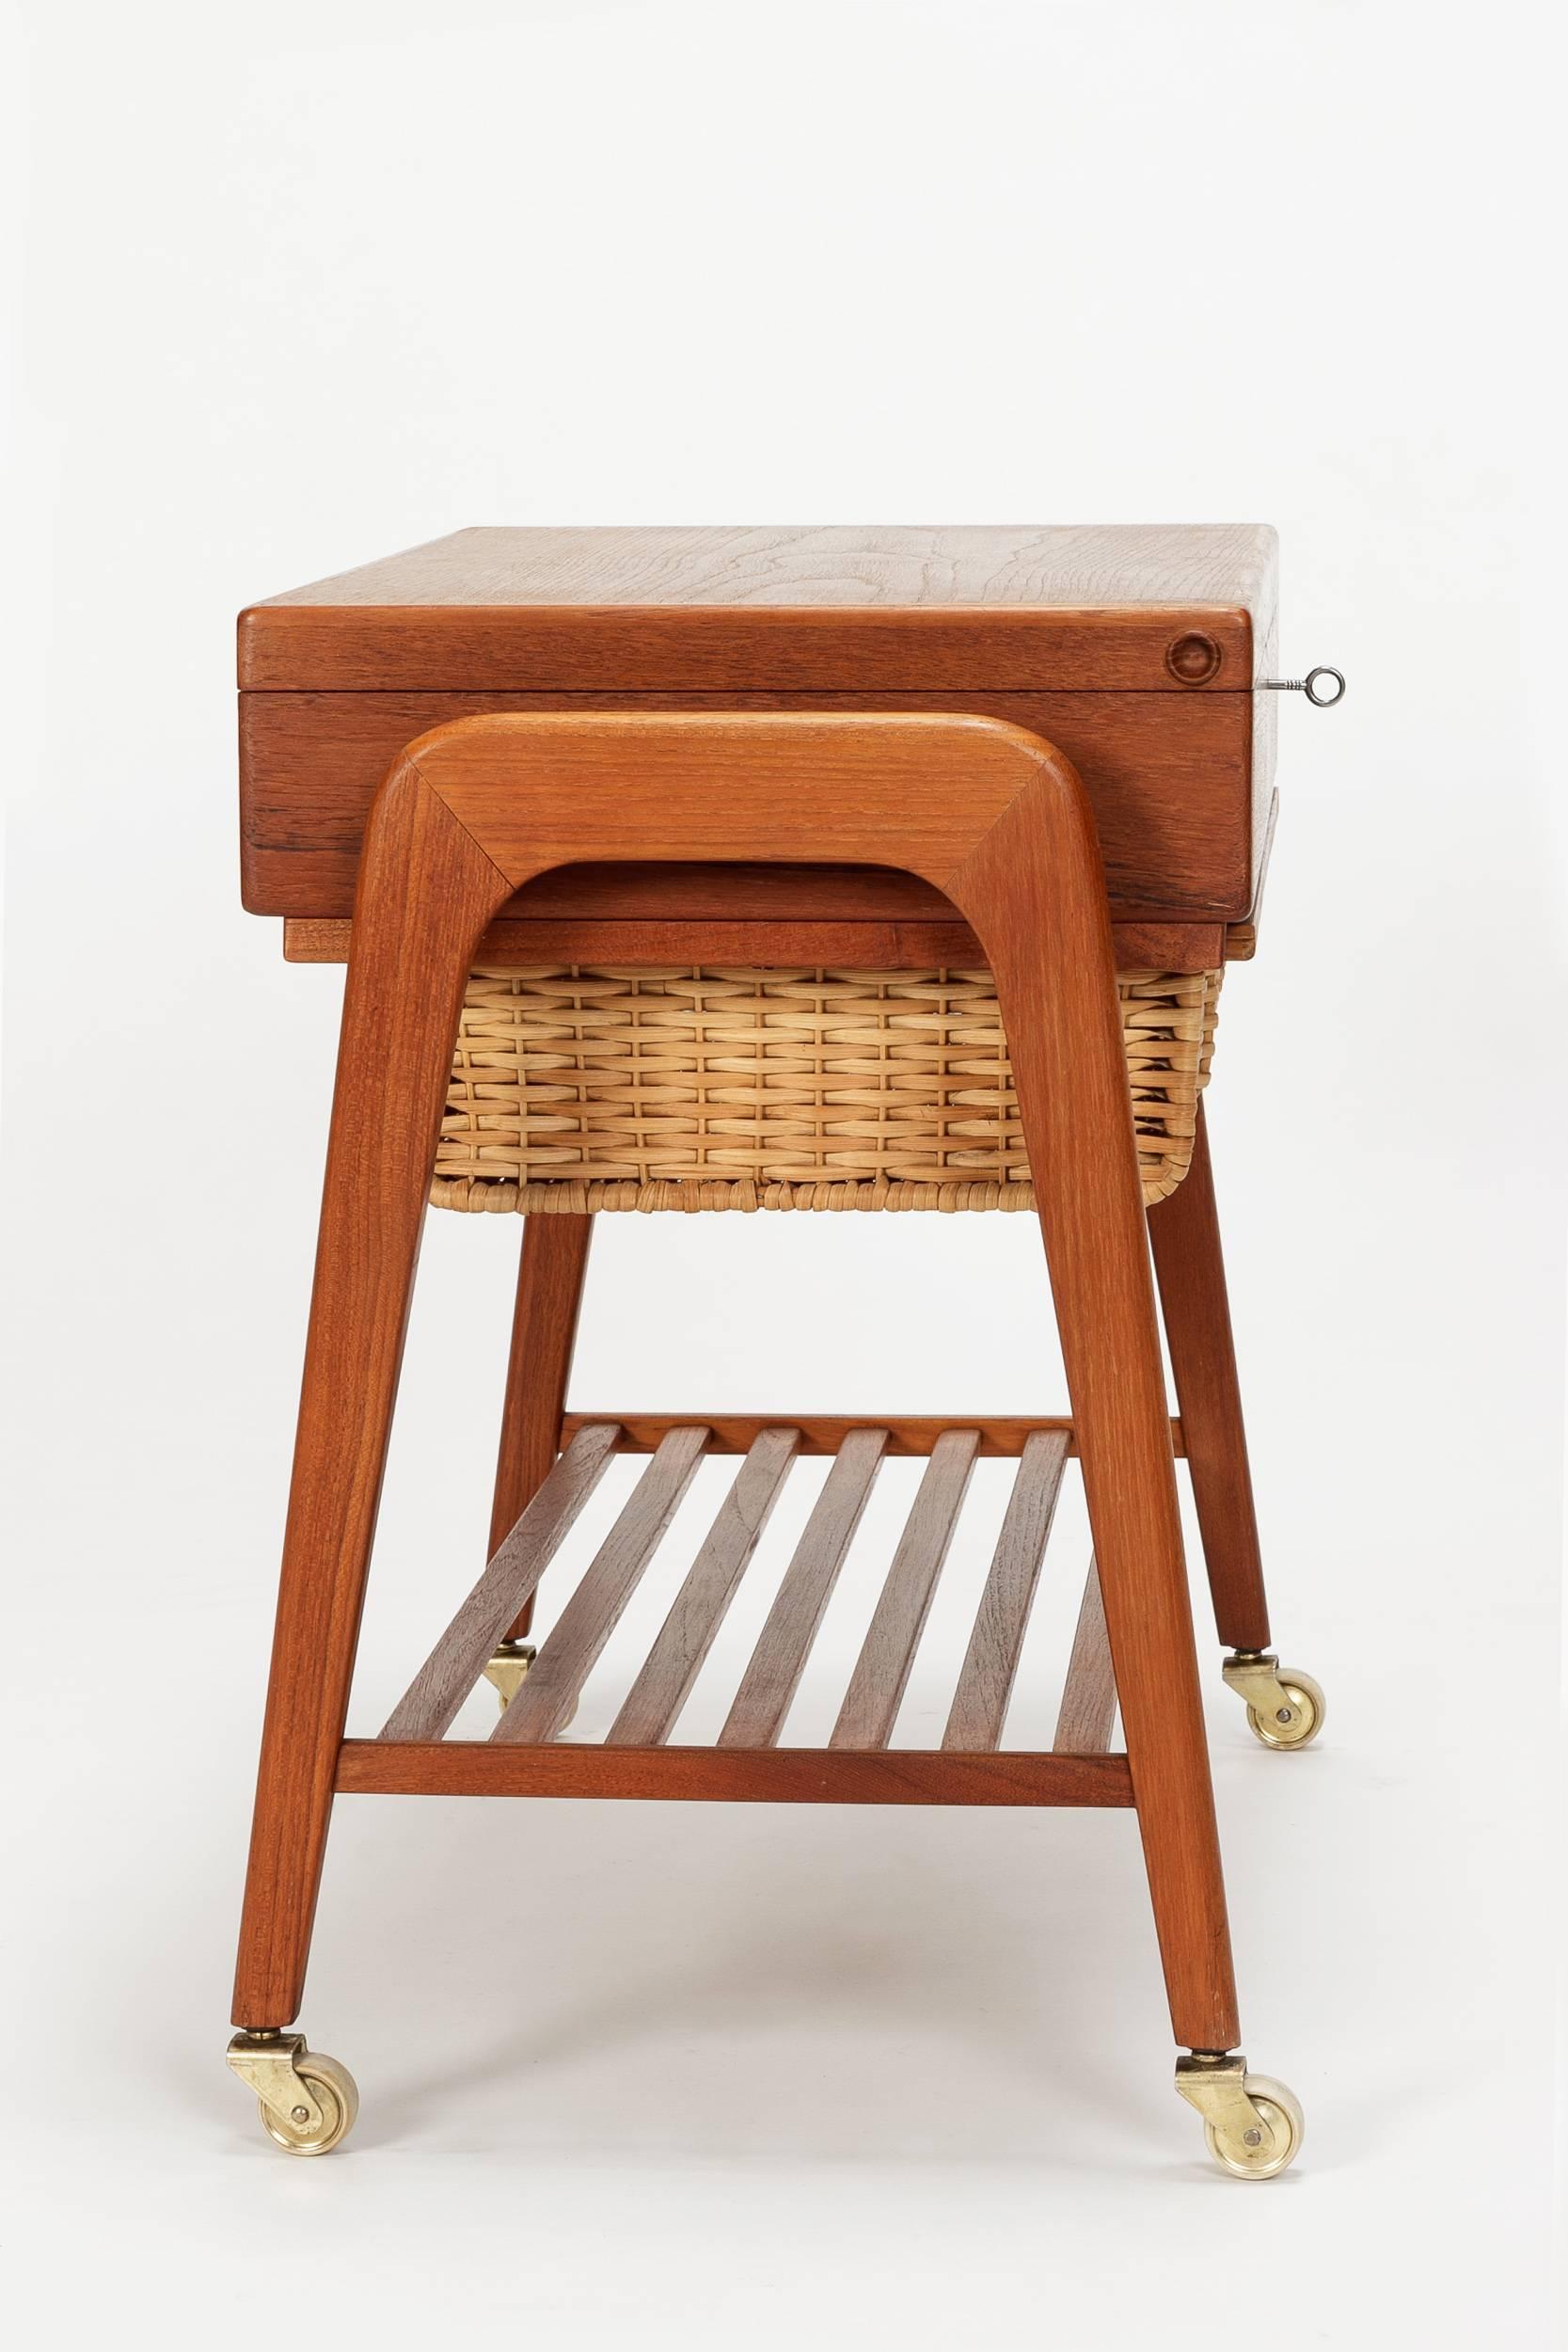 Danish modern sewing table designed by Povl Dinesen in the 1960s. Teak cabinet with locking drawer, a shelf and a sliding basket.